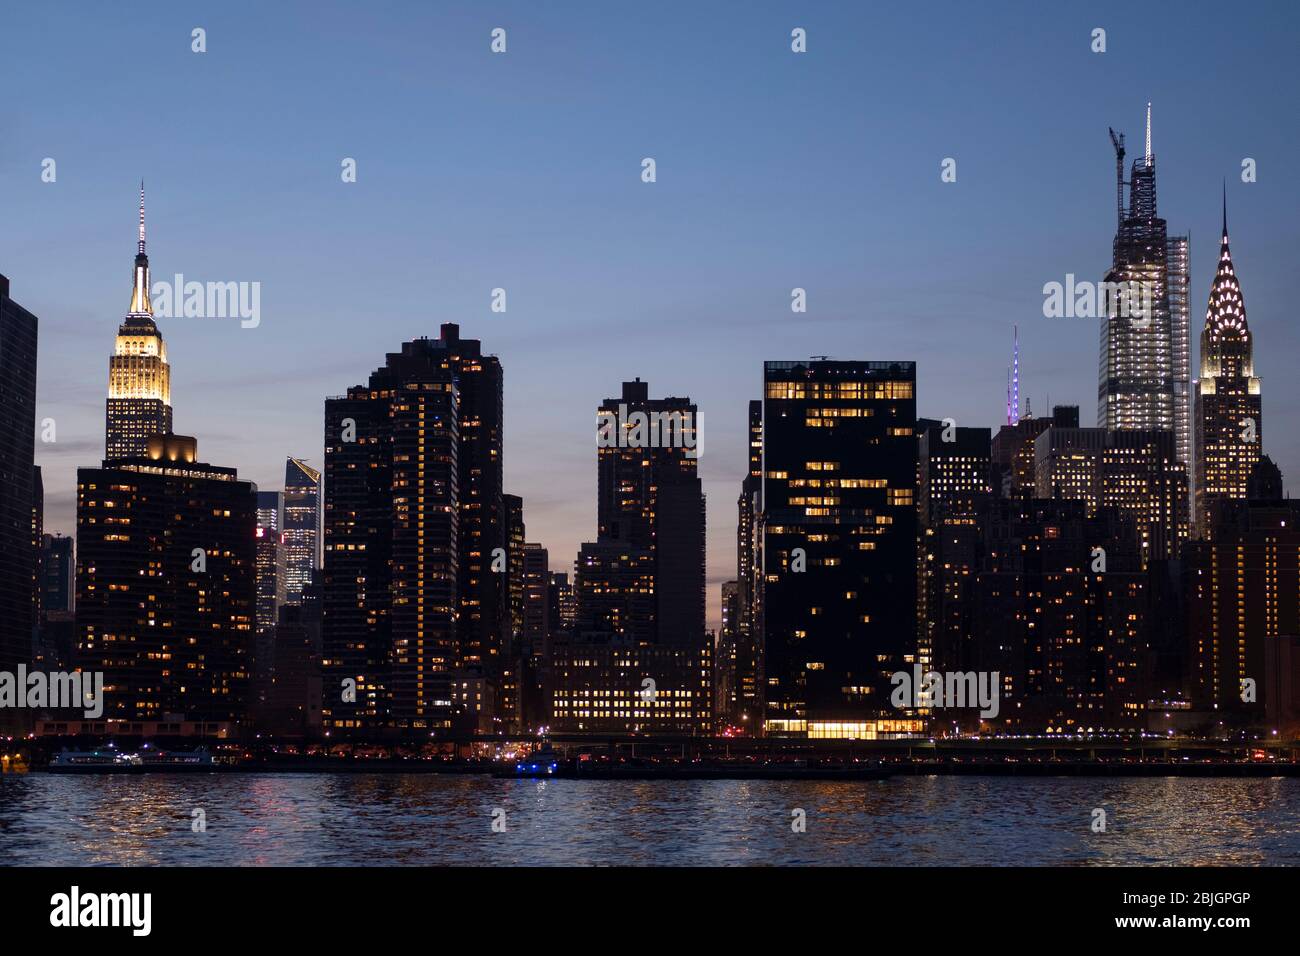 Evening view of the Manhattan Skyline with Empire State, One Vanderbilt, and Chrysler buildings form the East River in New York City Stock Photo